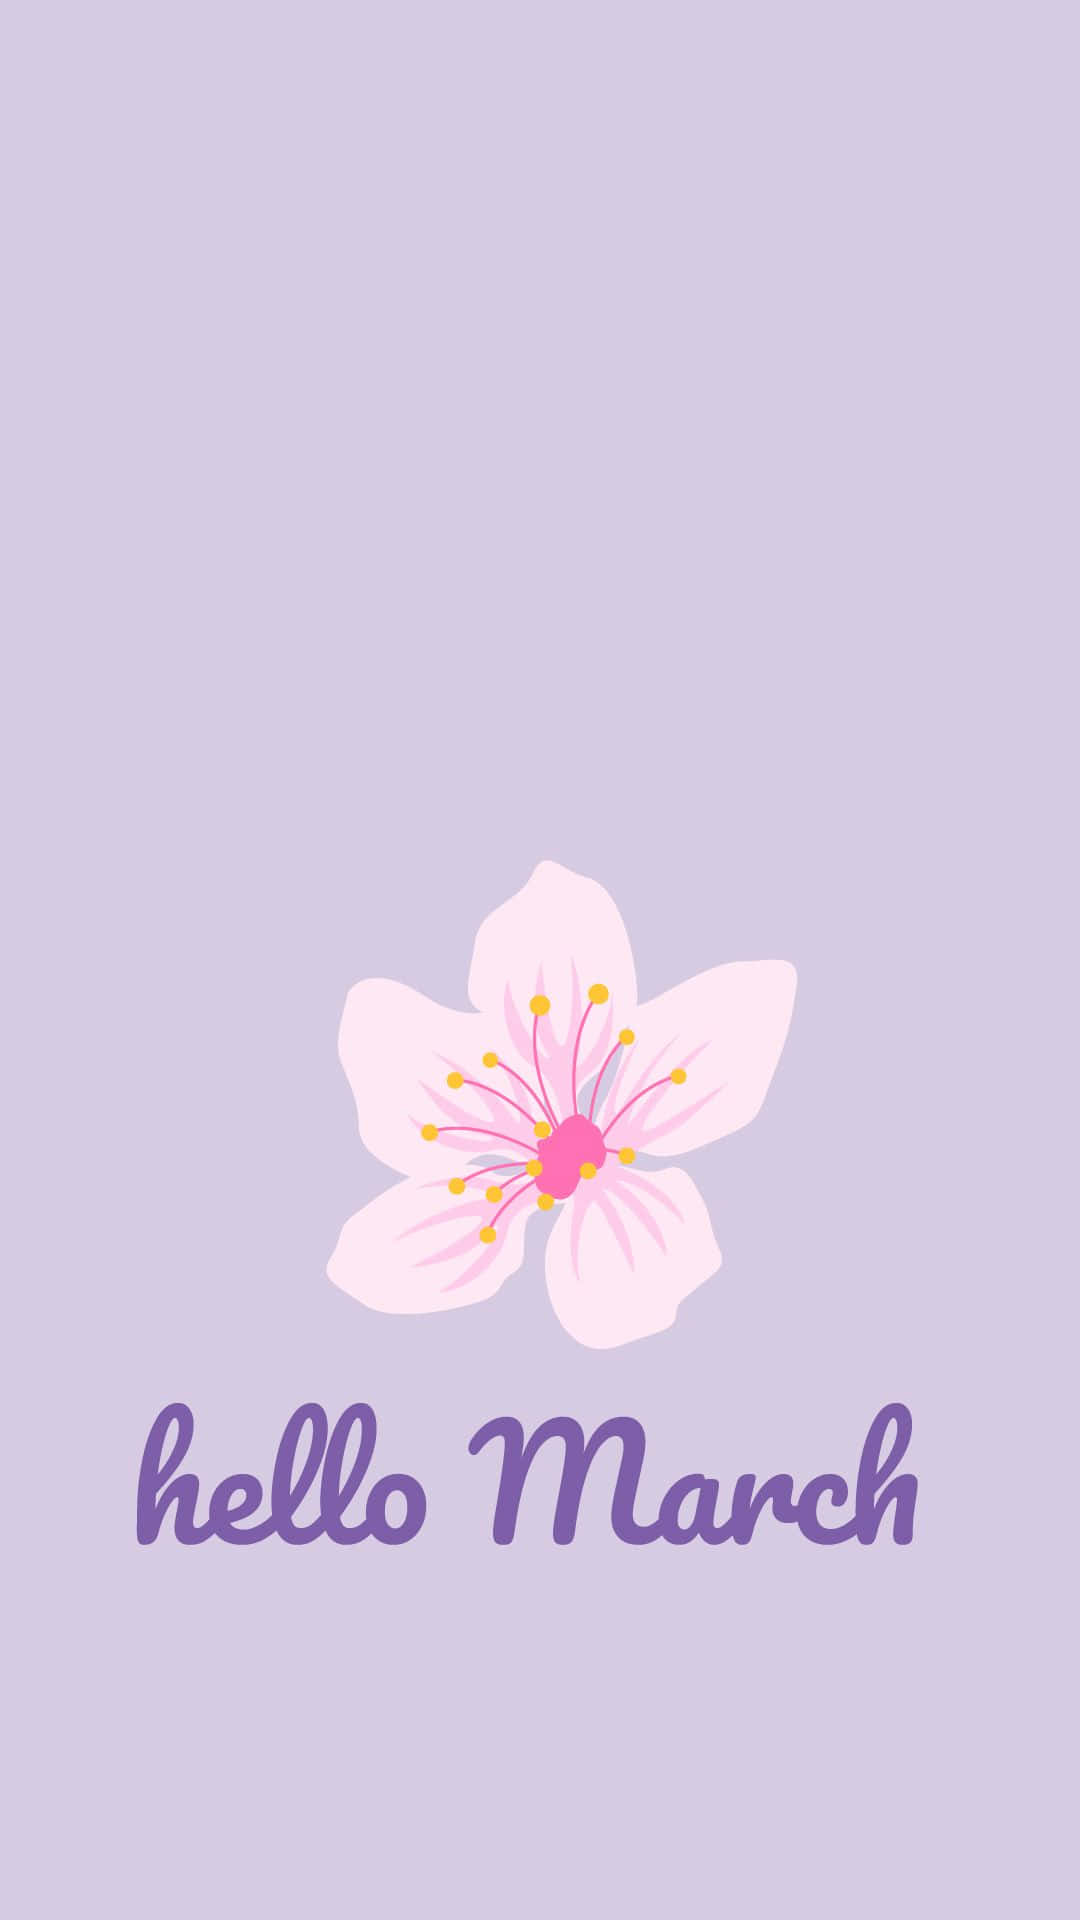 It's time for March - hello, new beginnings! Wallpaper